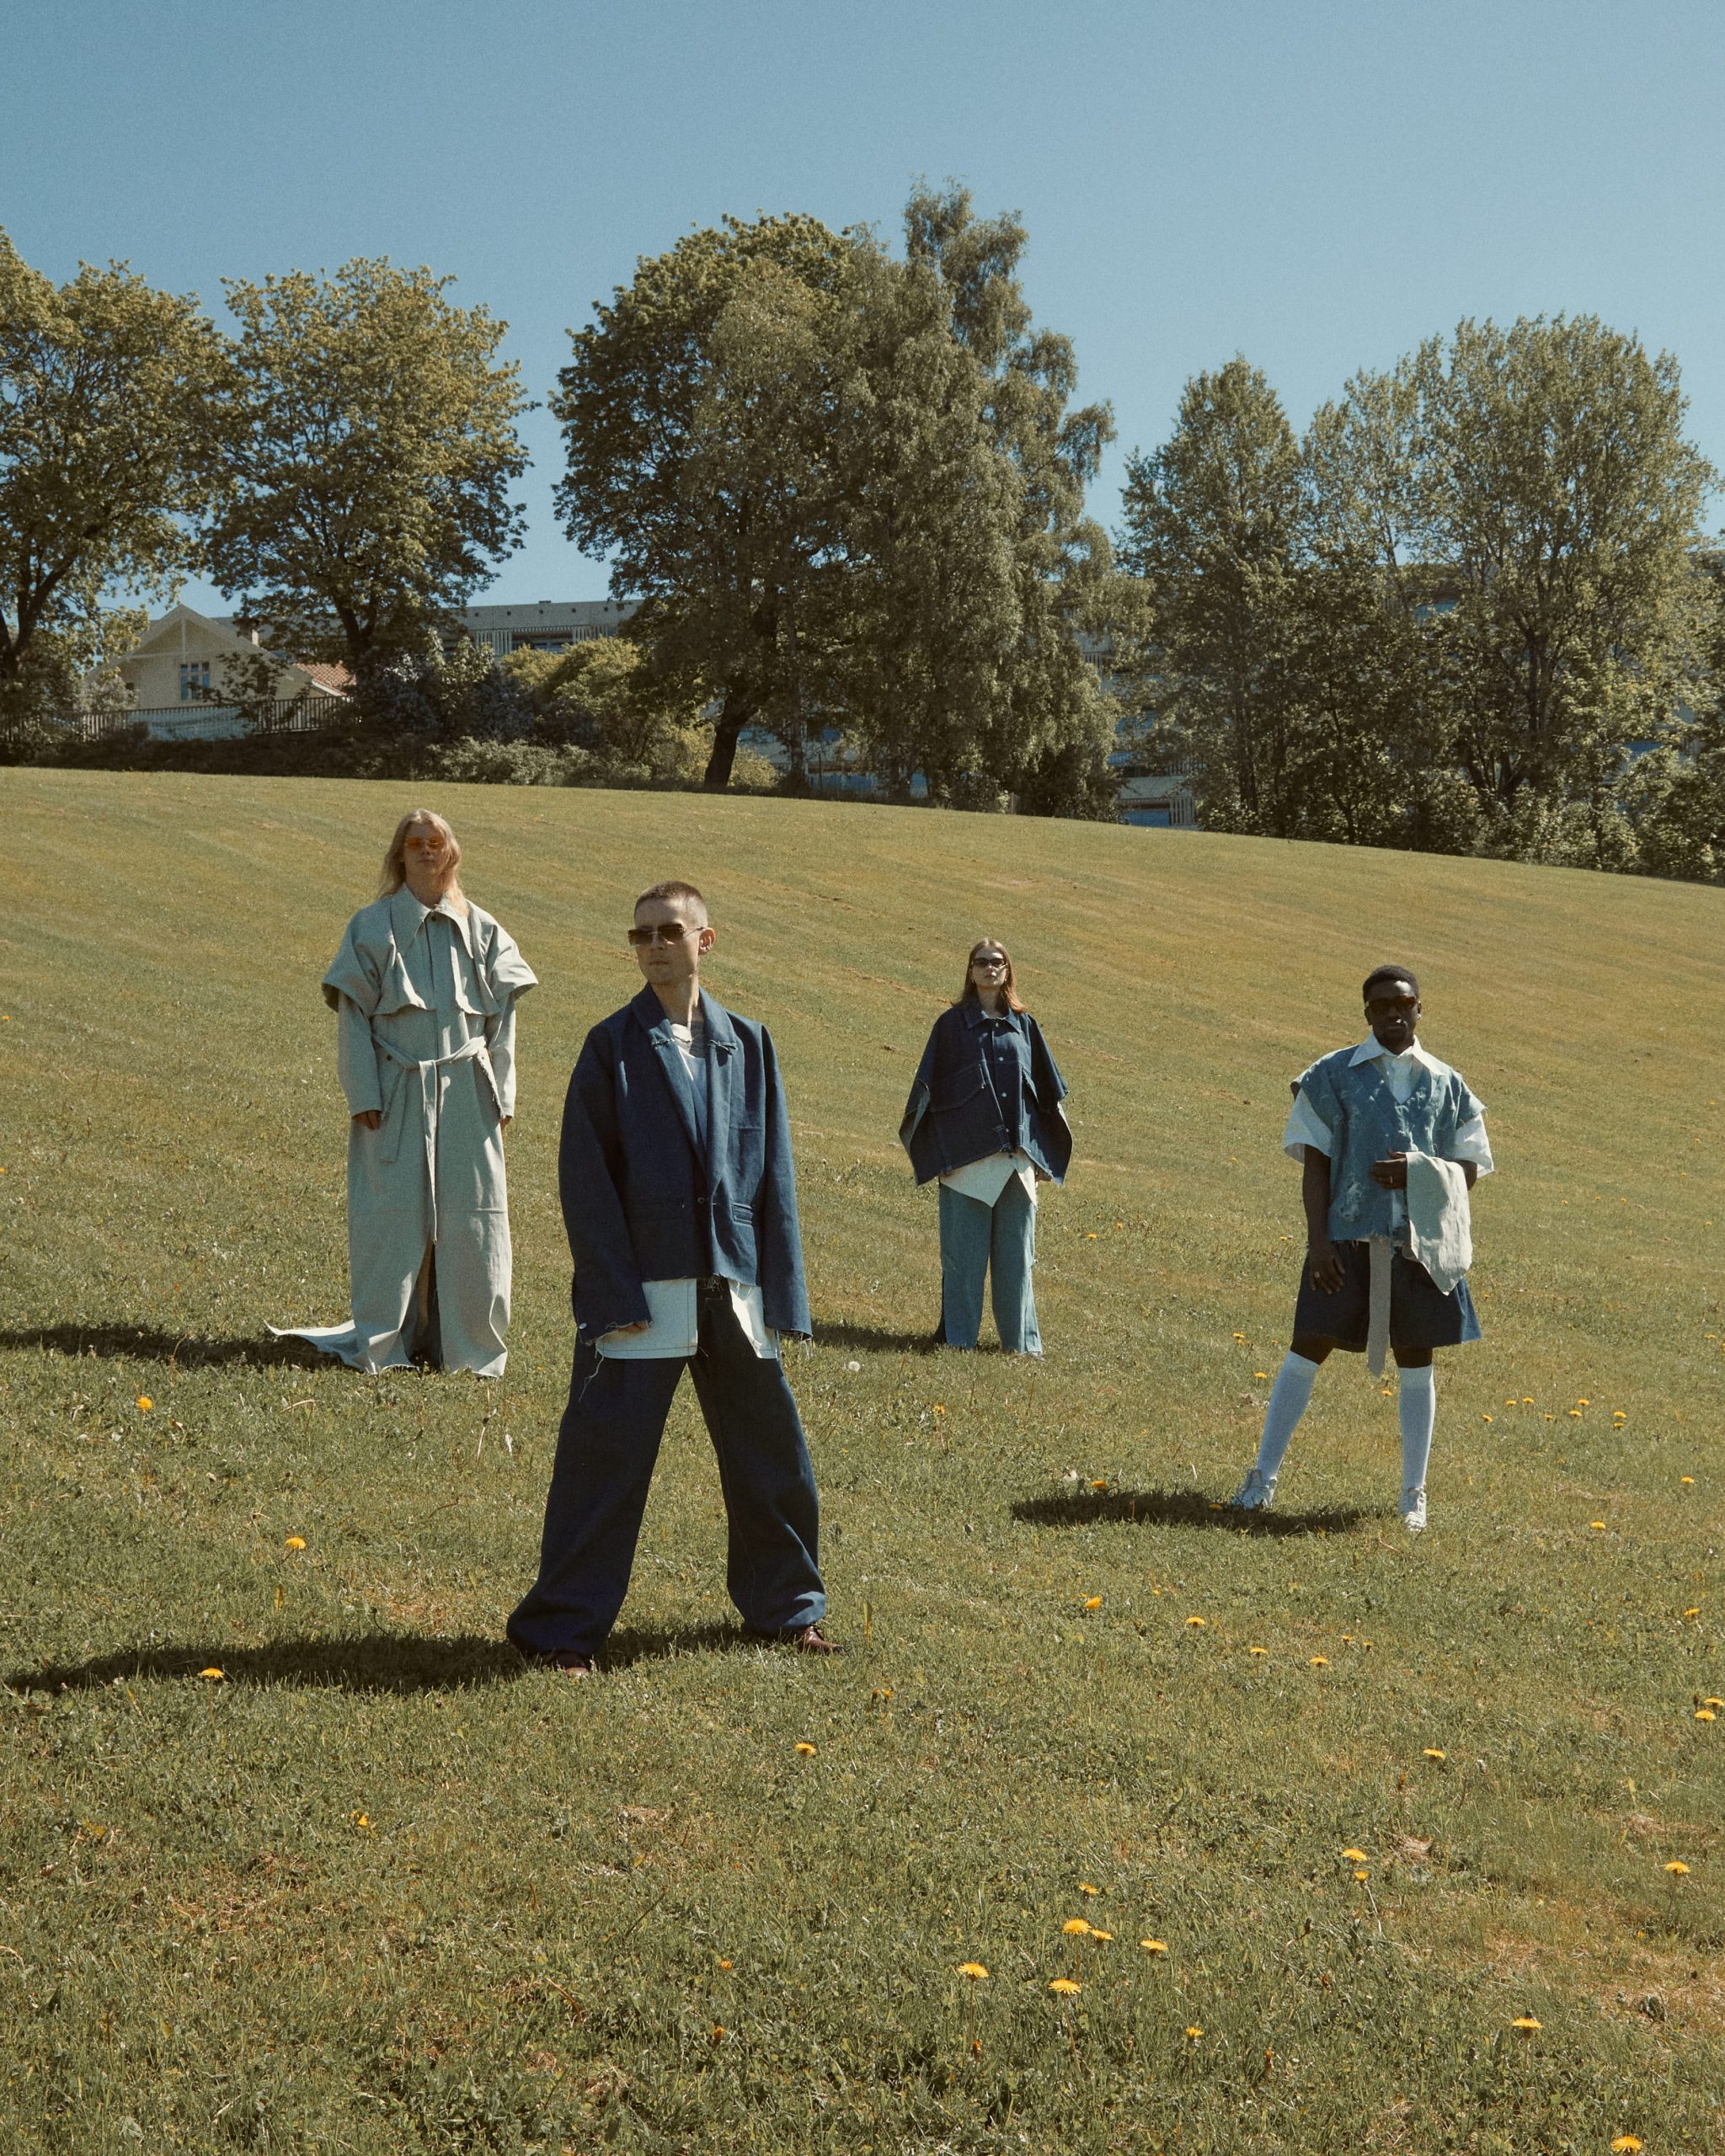 Group: Four people in full denim in a field